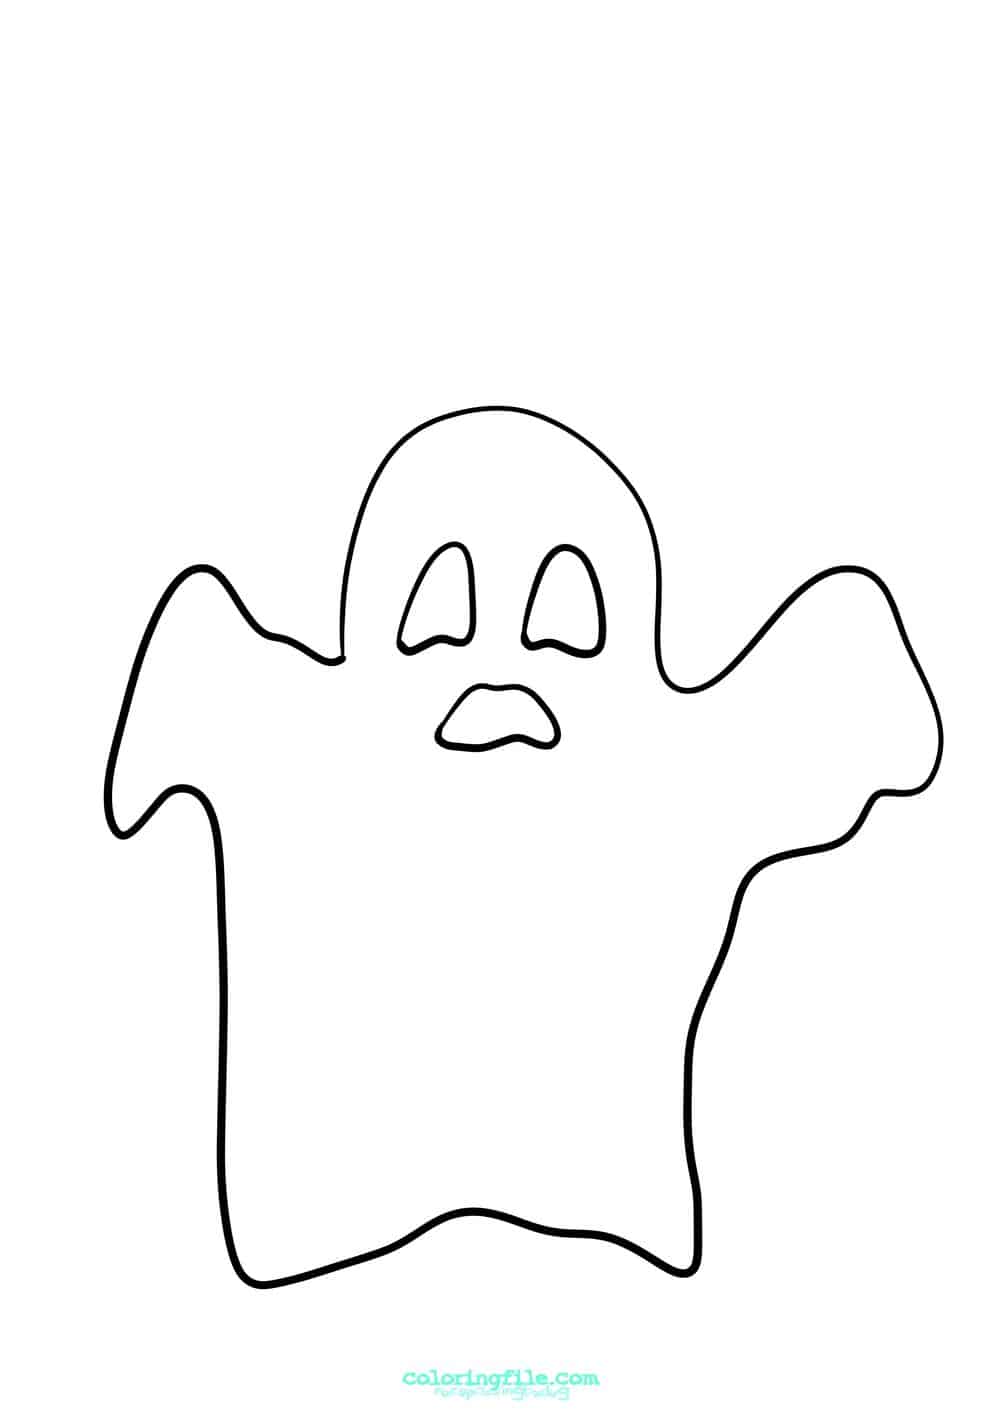 Ghost halloween coloring pages